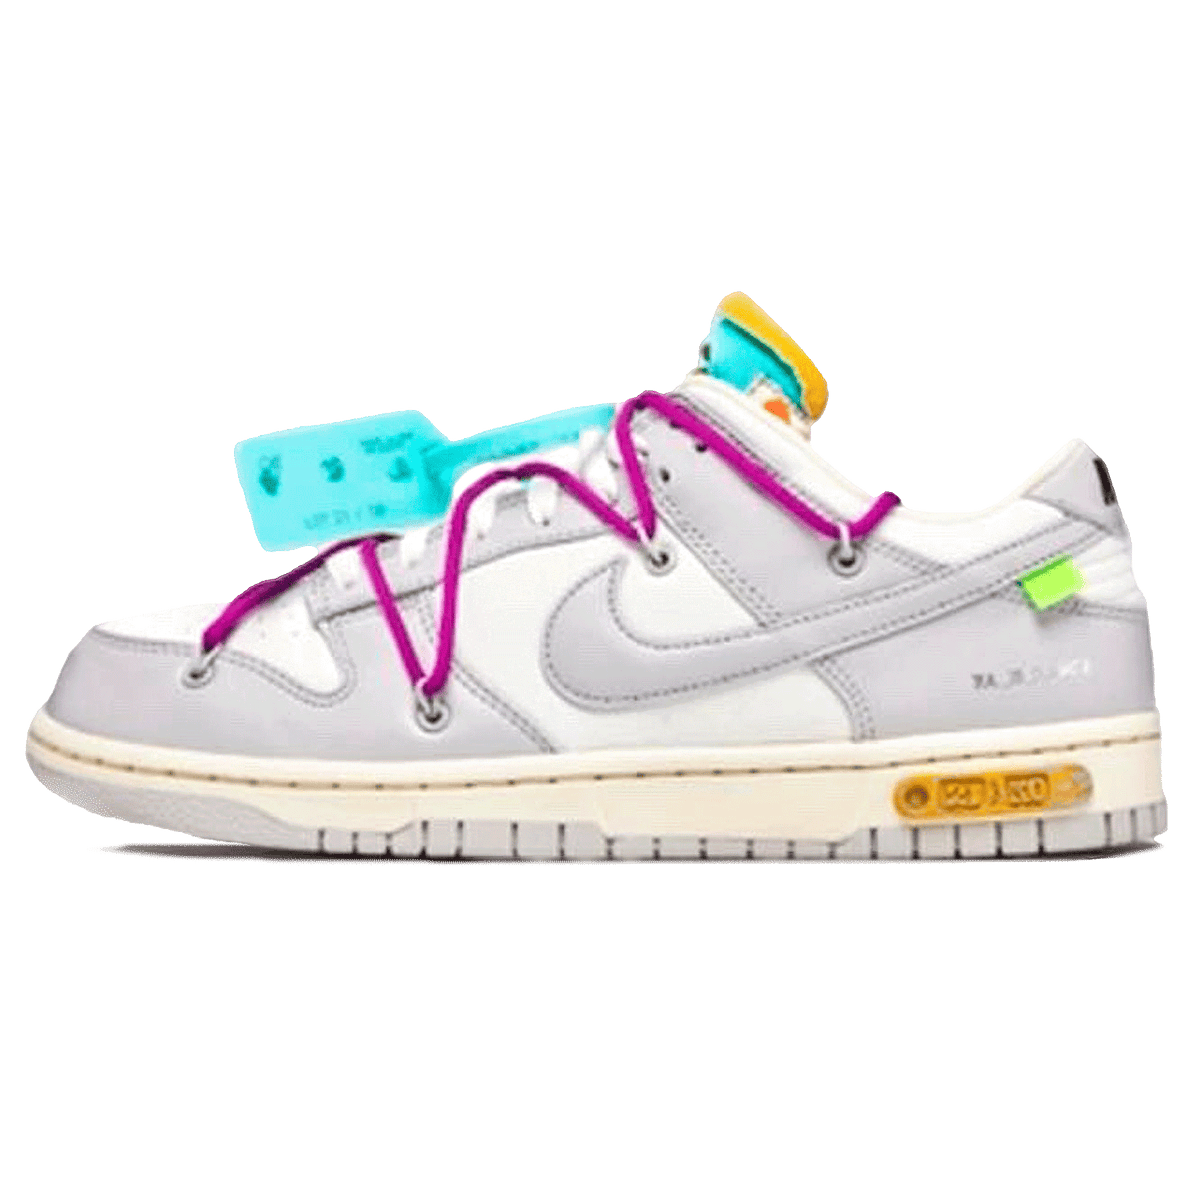 Off-White x Nike Dunk Low 'Lot 21 of 50' - Kick Game